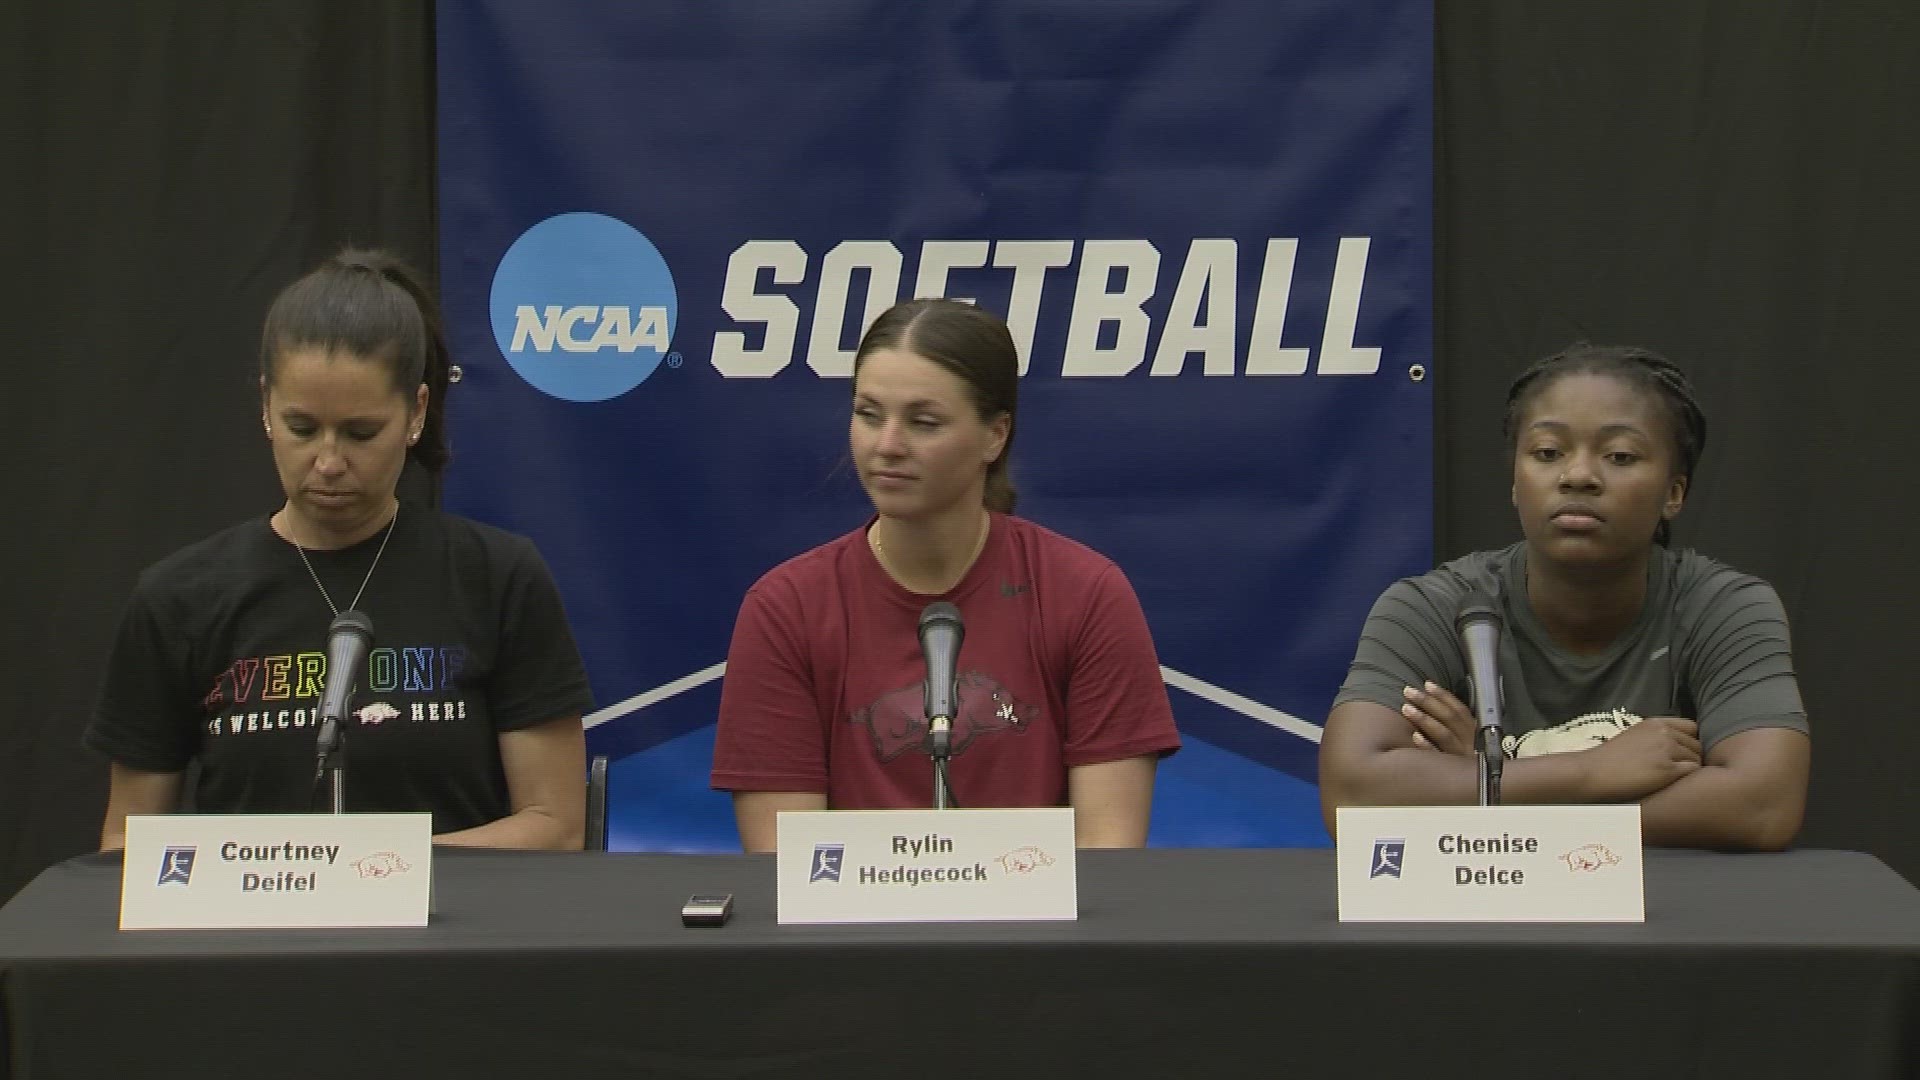 Before the Fayetteville Regional gets underway on Friday, the Hogs preview the NCAA Tournament.